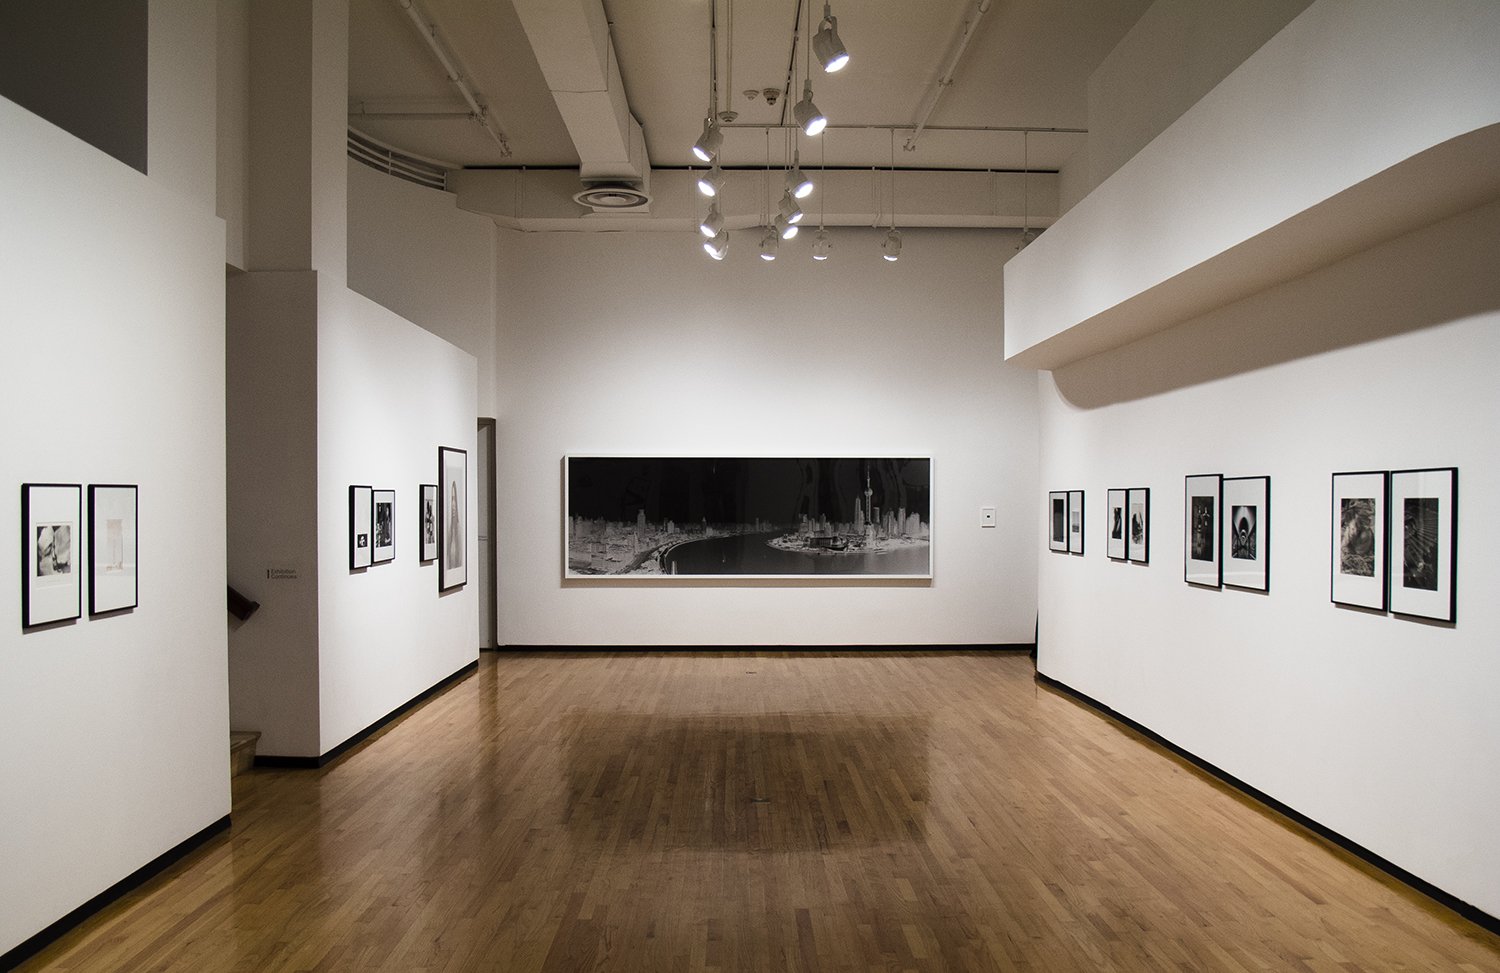 Jan Tichy, Installation view of 1979:1-2012:21 Jan Tichy Works with the MoCP Collection, West Gallery, Museum of Contemporary Photography, Chicago. Photo courtesy of the artist and the MoCP.